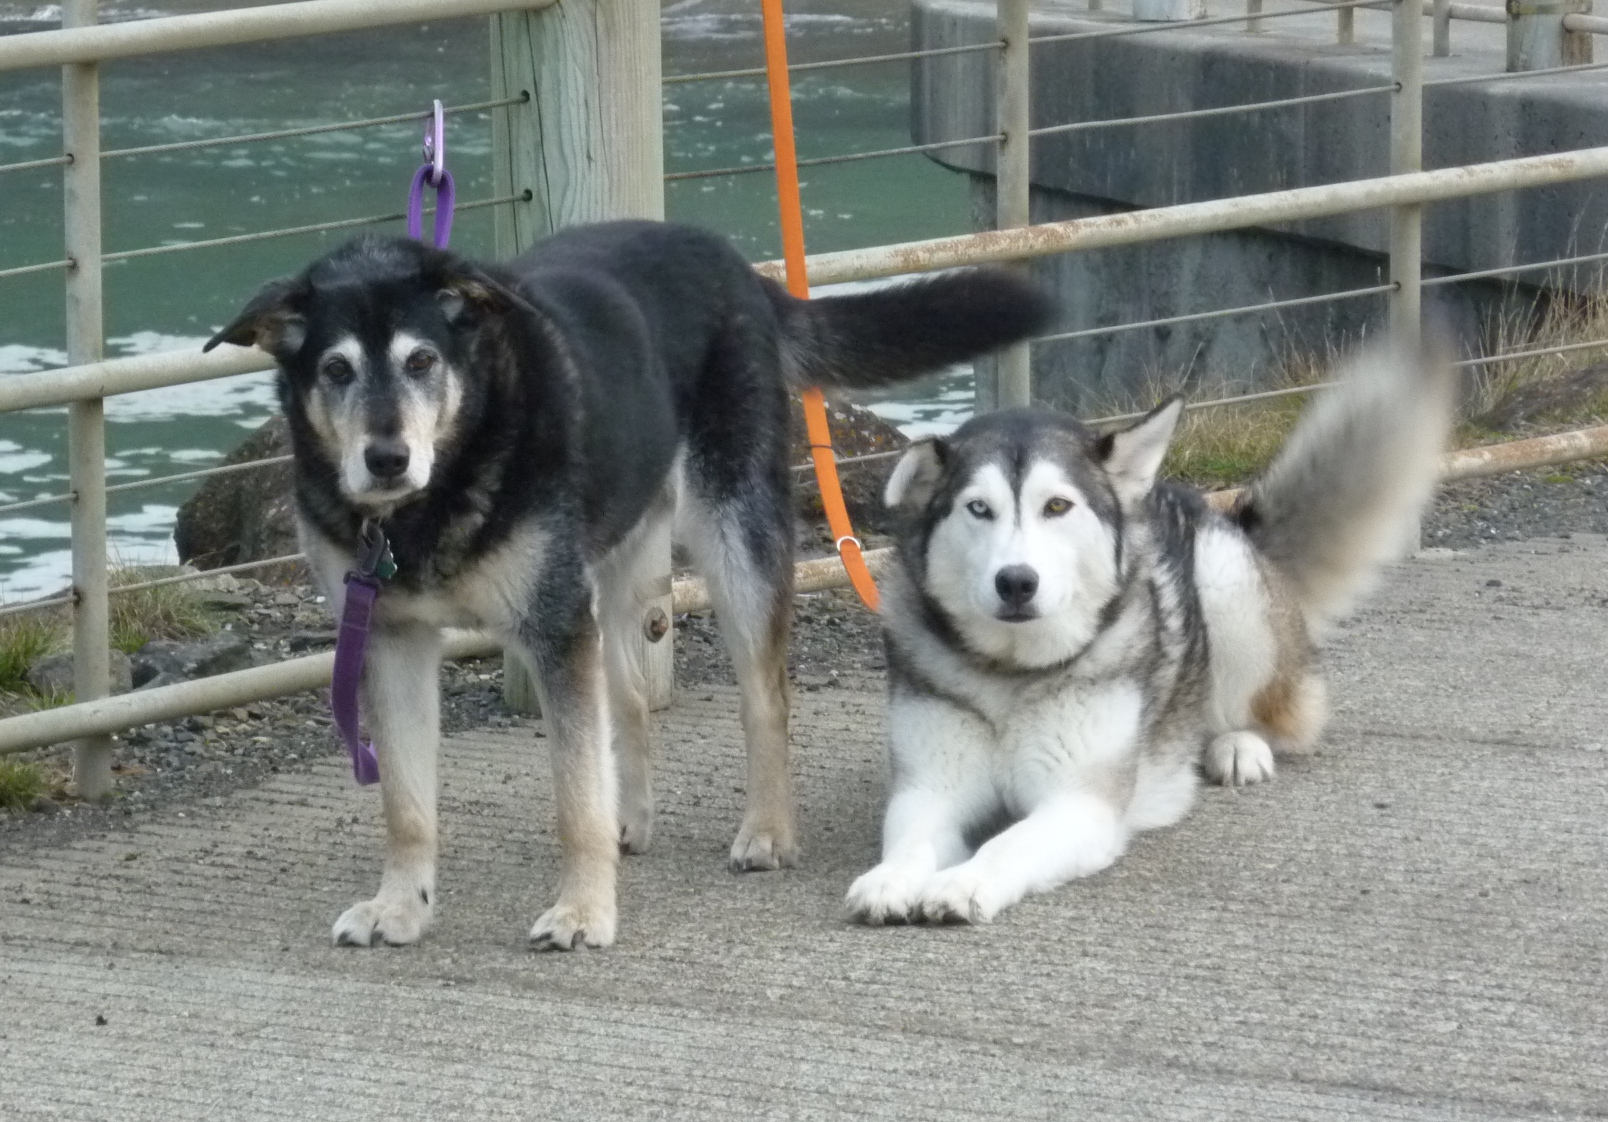 Help get justice for Kenai and Osar, Idaho dogs shot in